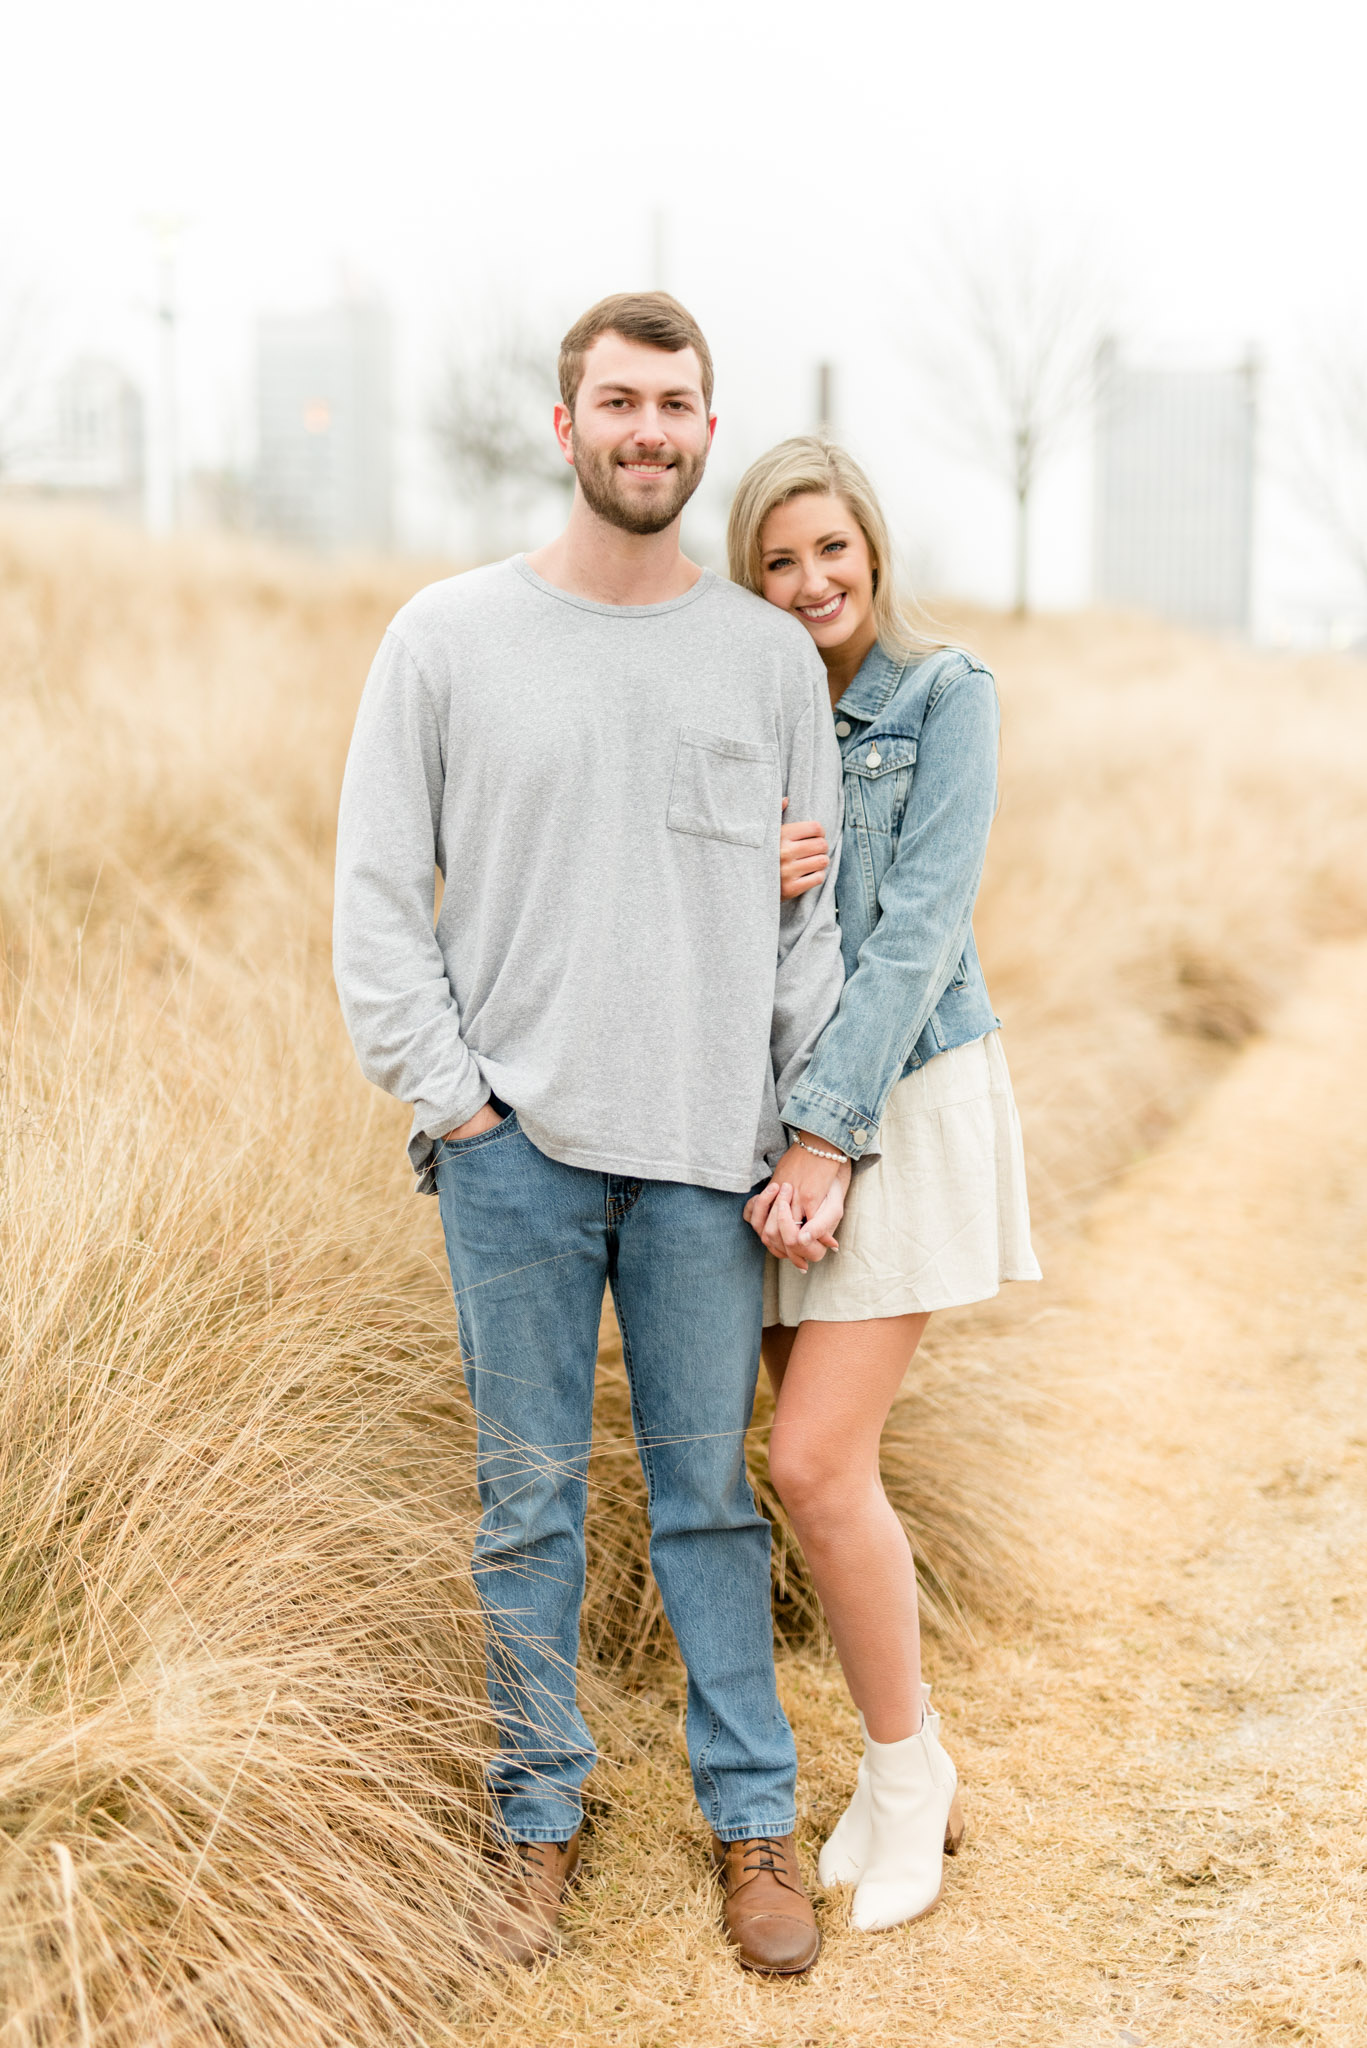 Couple stands in field and smiles at camera.